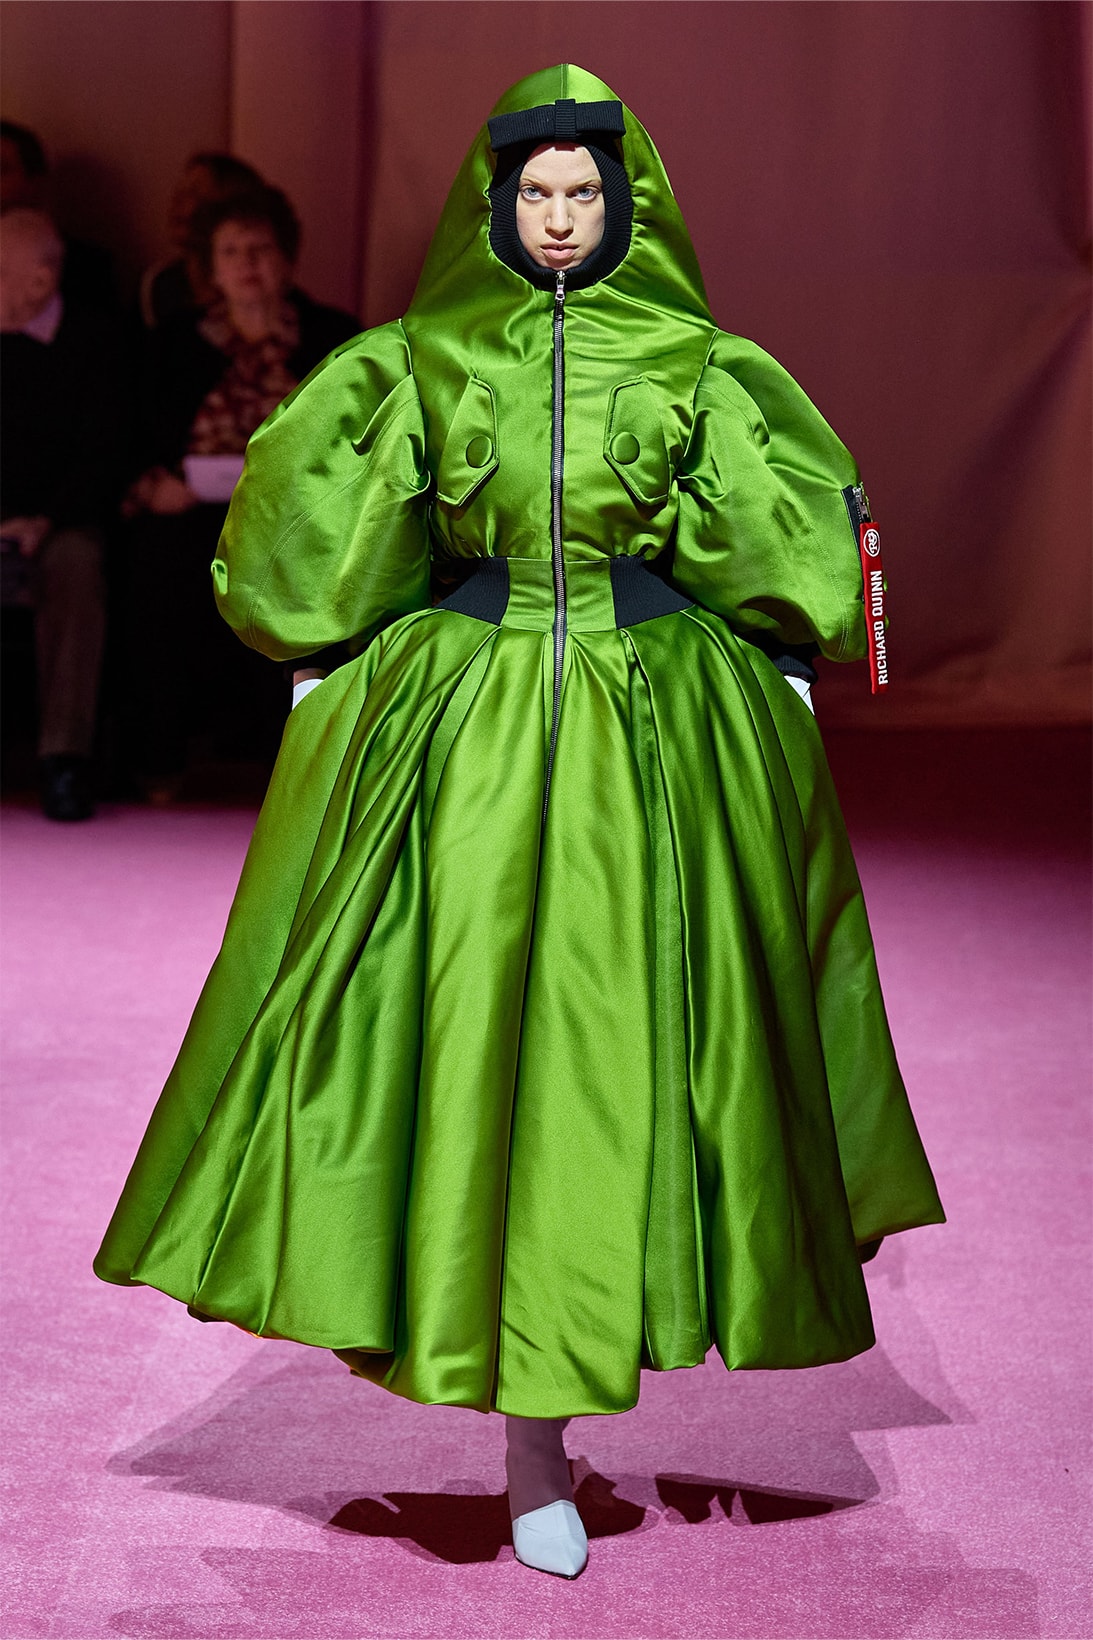 Richard Quinn Fall 2022 Collection London Fashion Week Outerwear Dresses Runway Images